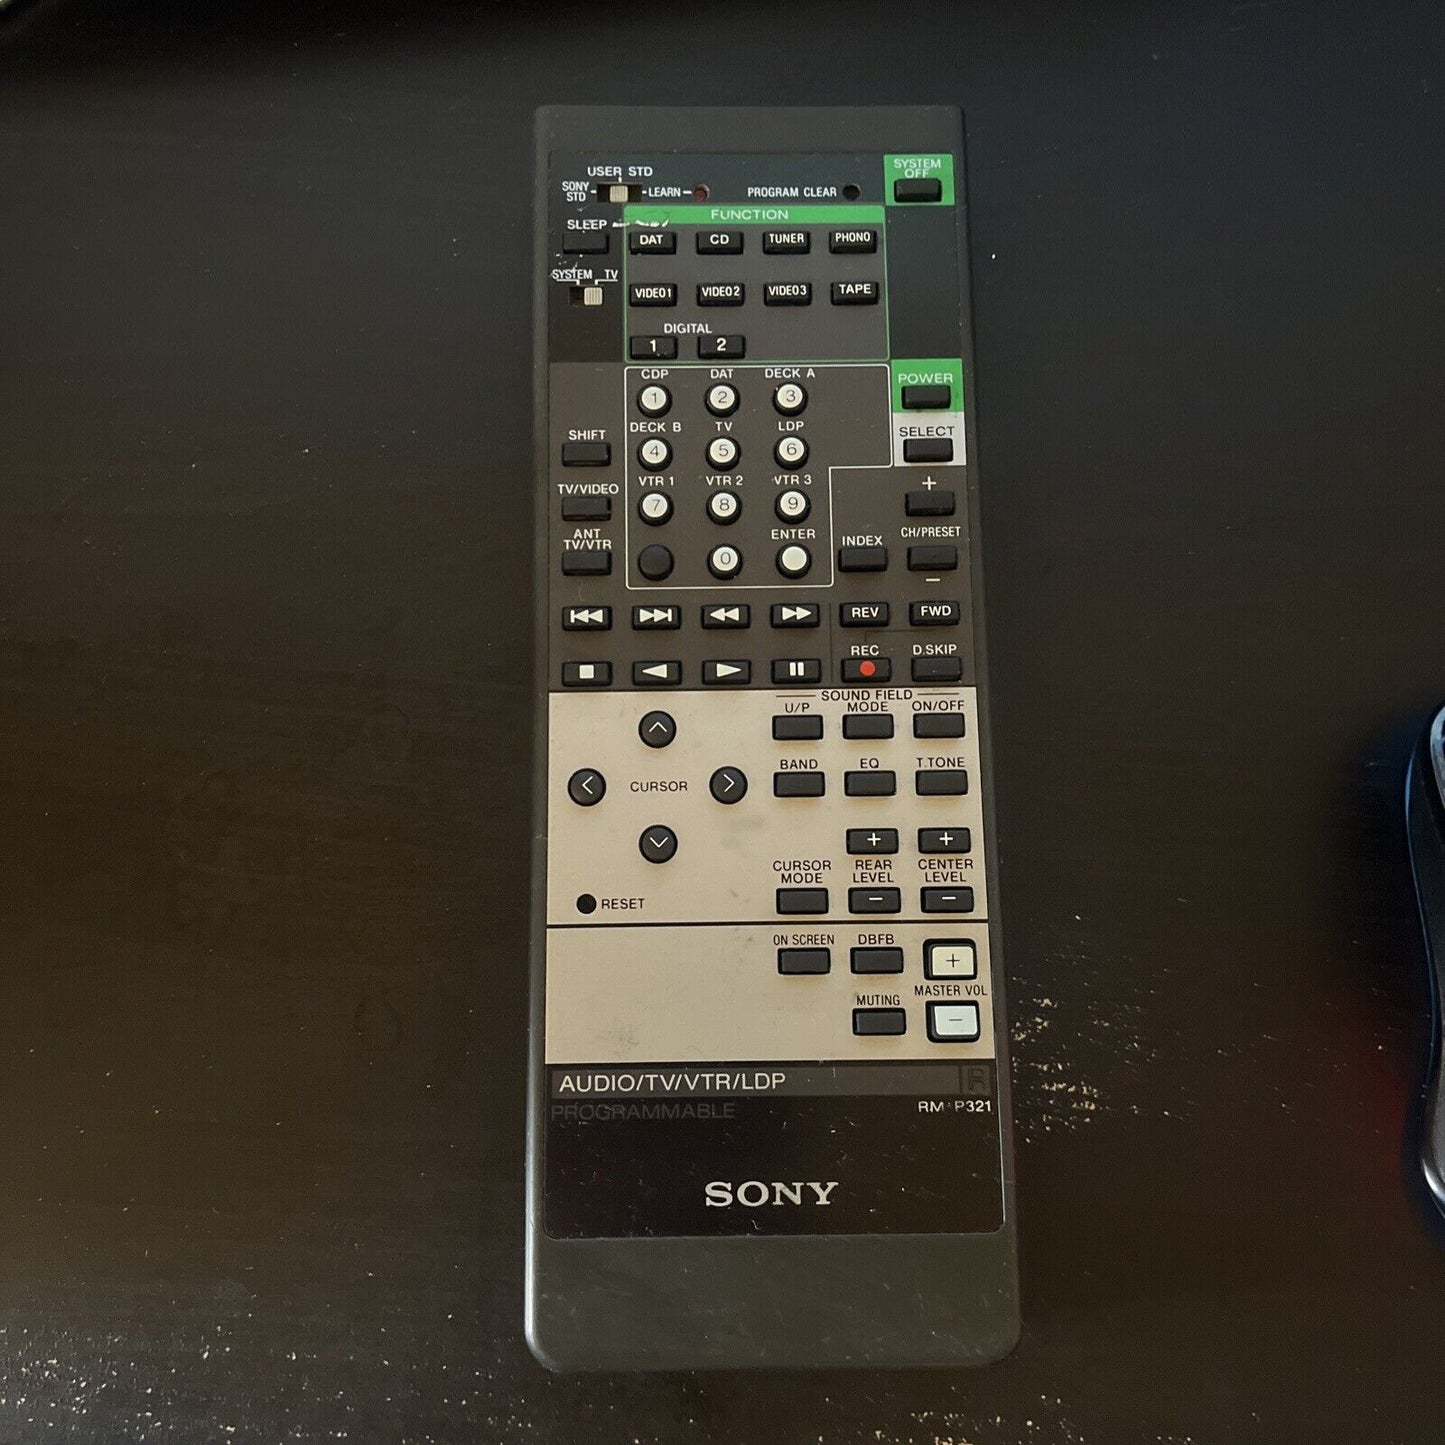 Genuine Sony RM-P321 Remote Control Programmable *Doesn't Work - For Parts*